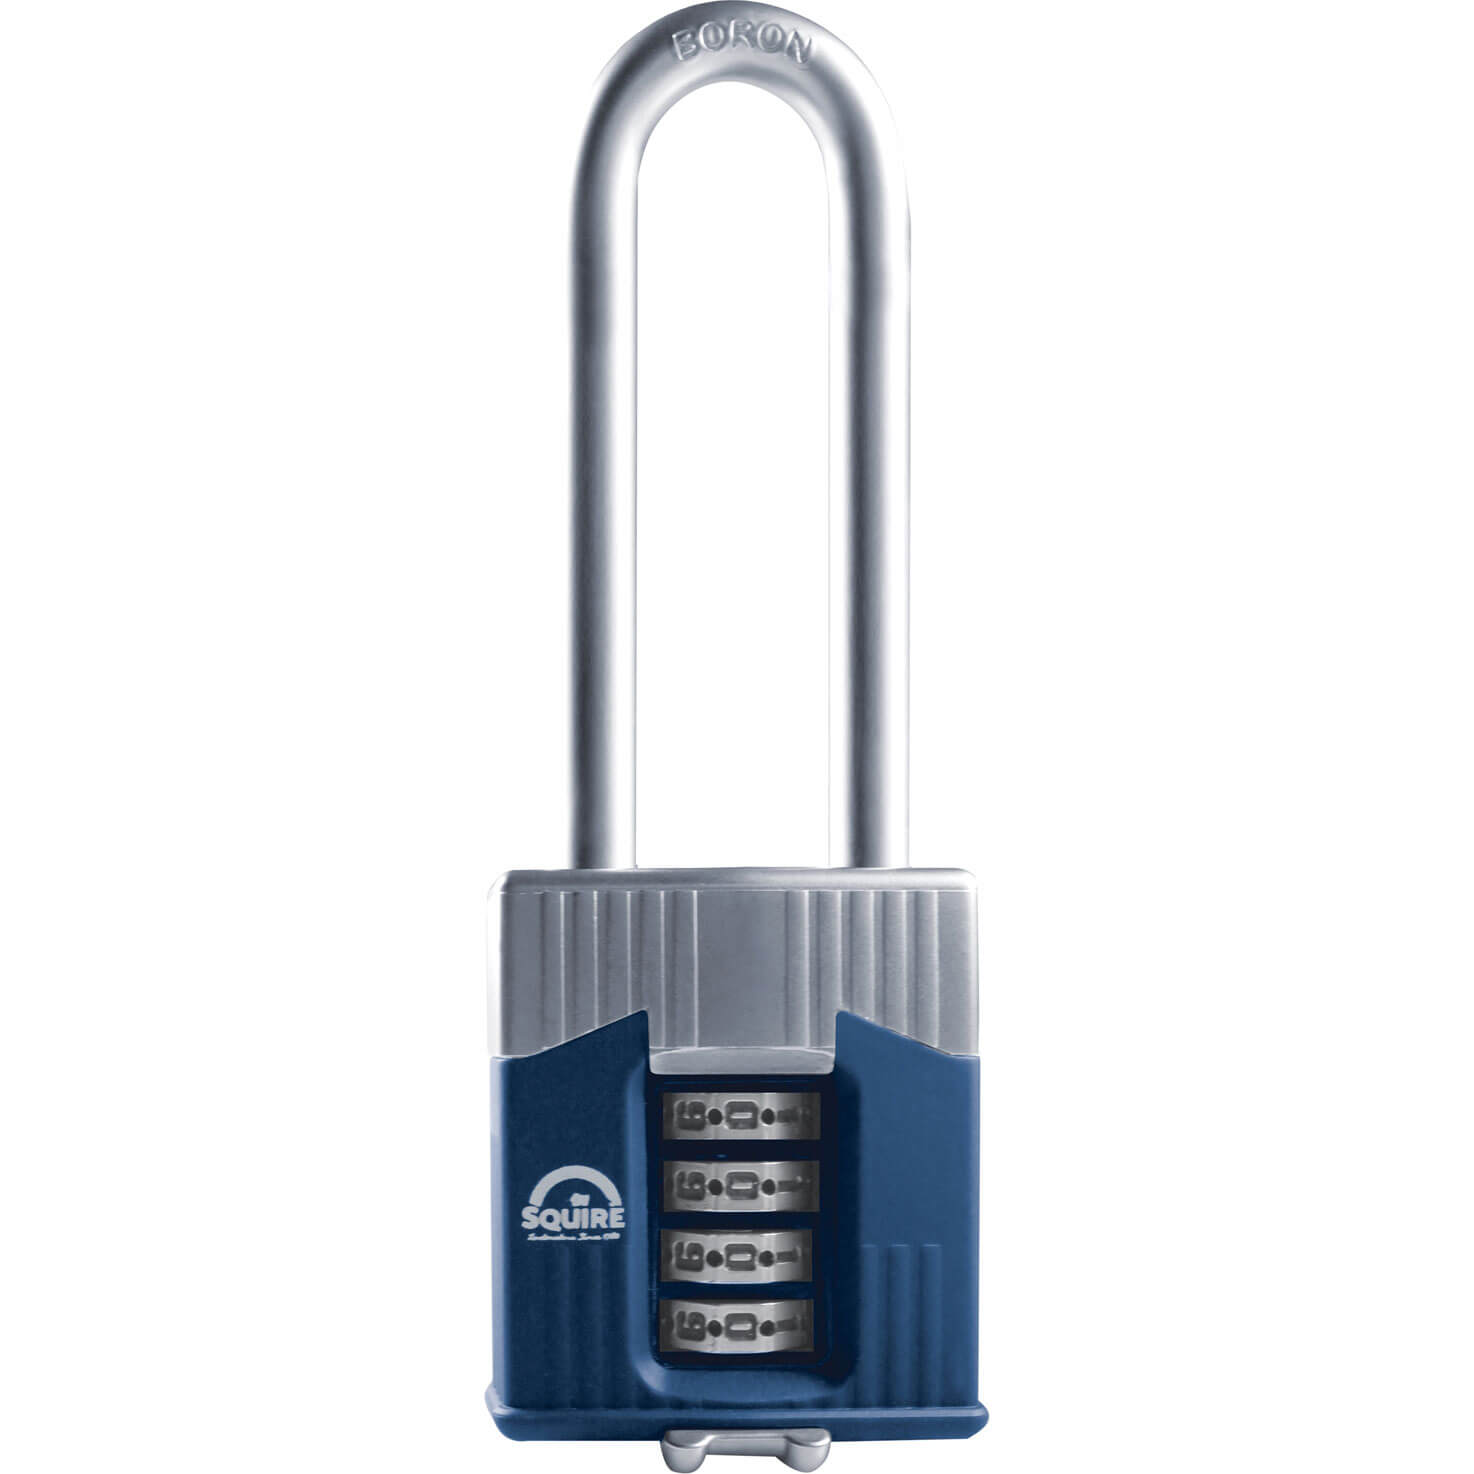 Image of Henry Squire Warrior High-Security Shackle Combination Padlock 45mm Long